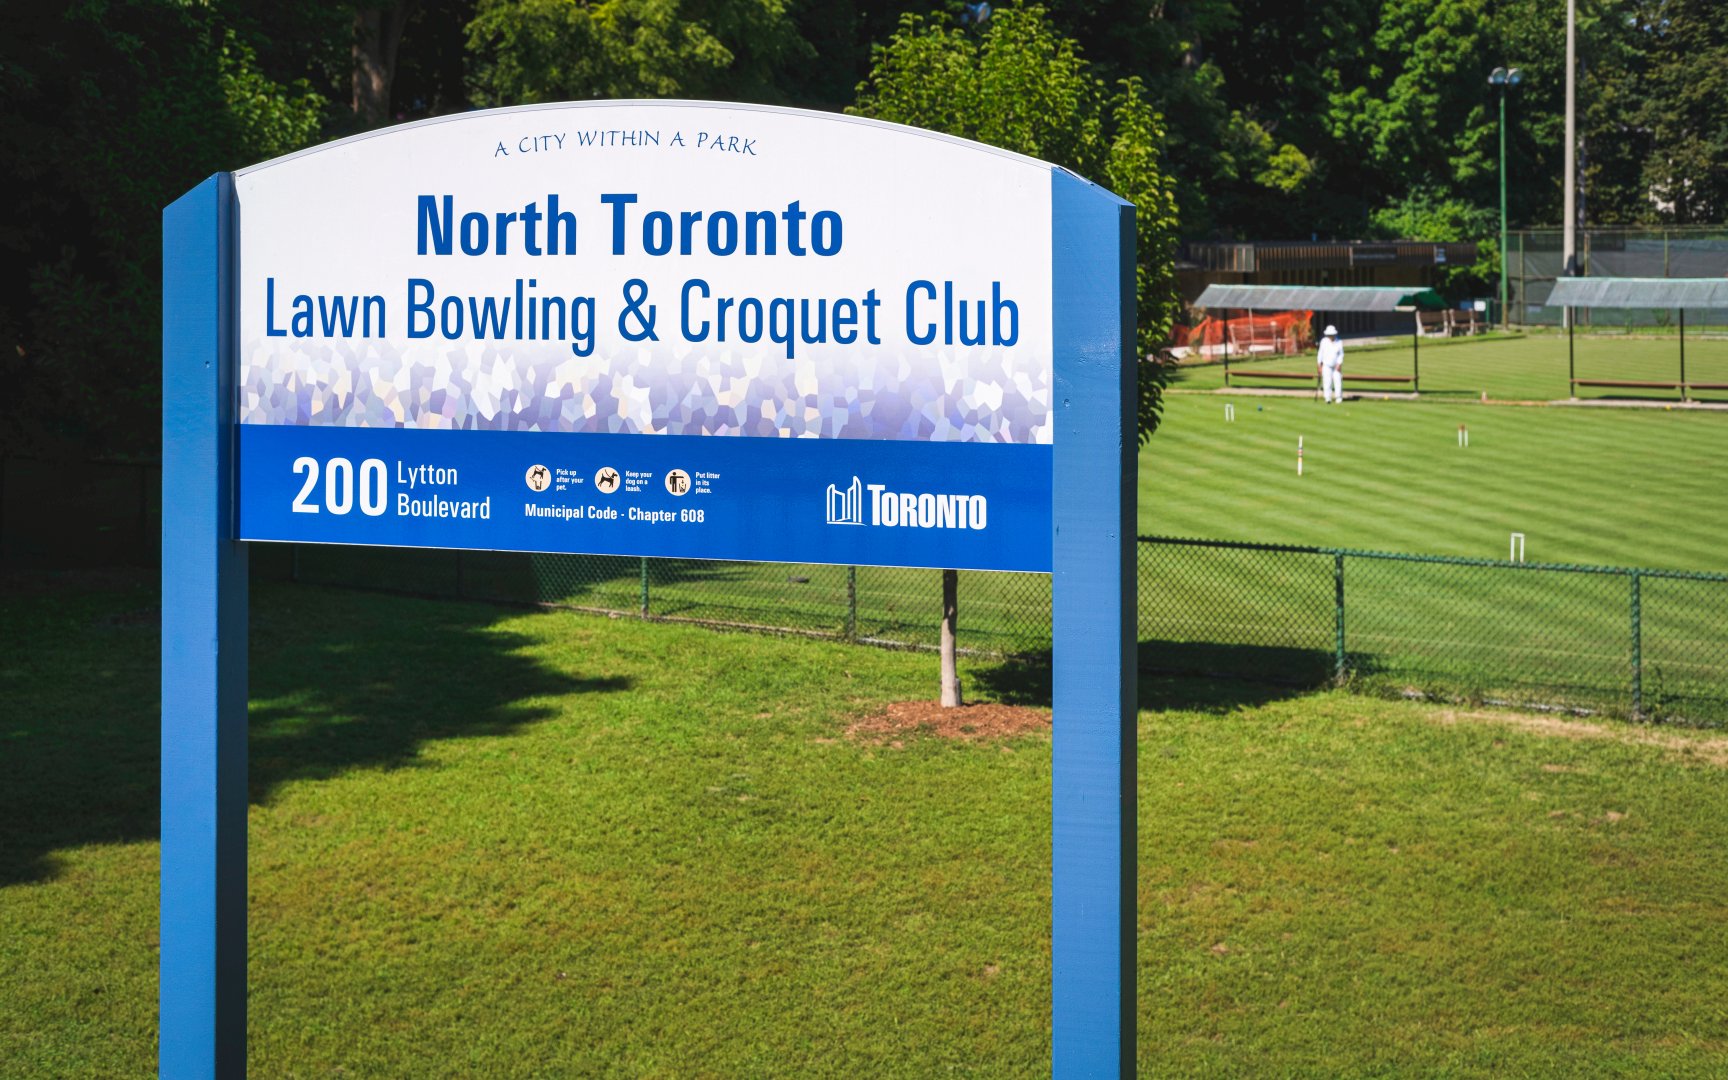 North Toronto Lawn Bowling & Croquet Club (c) Photo by SHANE Maps exclusively for SHANE Maps